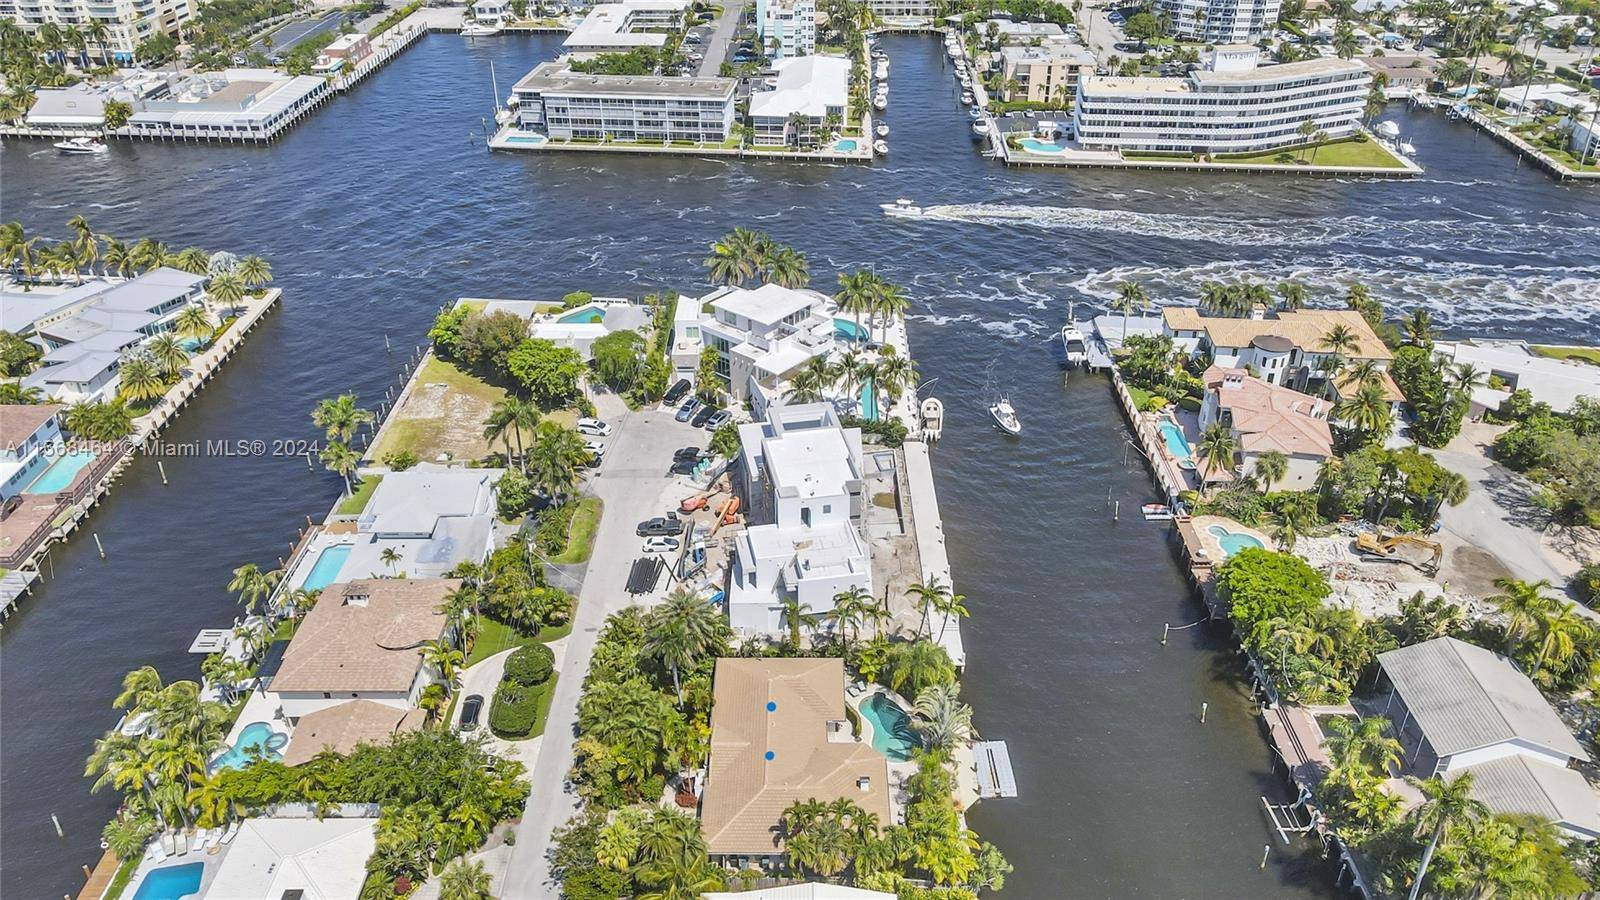 100' Deepwater NFB, pool, 2 car garage, located 2nd from point in Olde Coral Ridge.